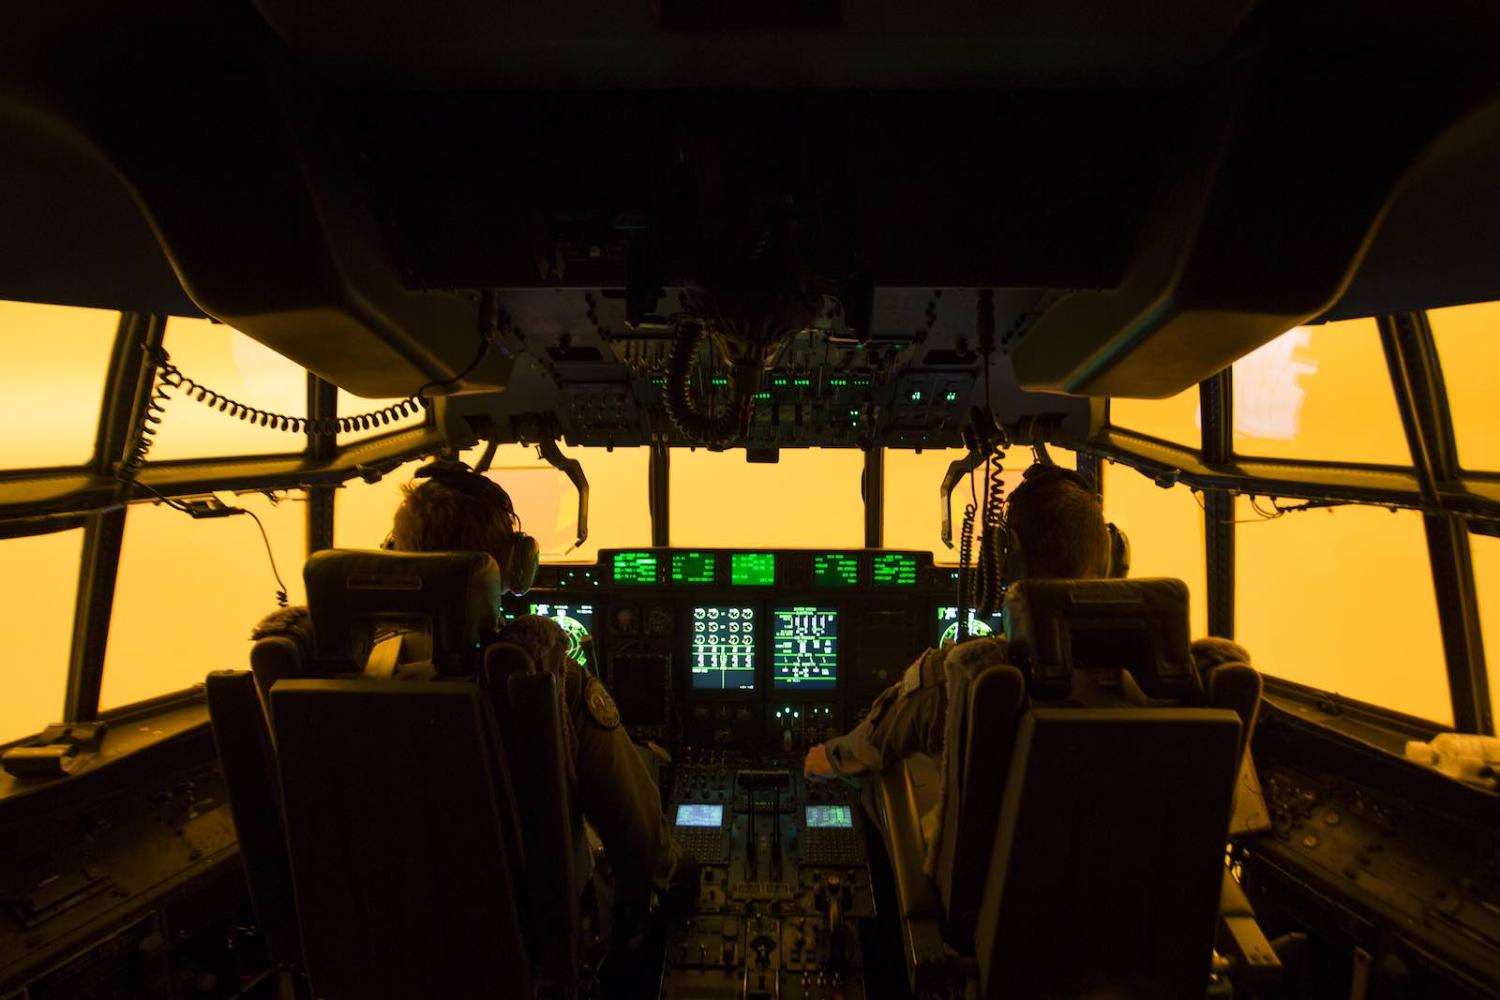 The flight deck lit by the glow of fires, an aircrew attempt a landing to drop off Fire and Rescue crews to assist fighting bushfires, 5 January in Merimbula, Australia (Photo: Australian Department of Defence via Getty Images)